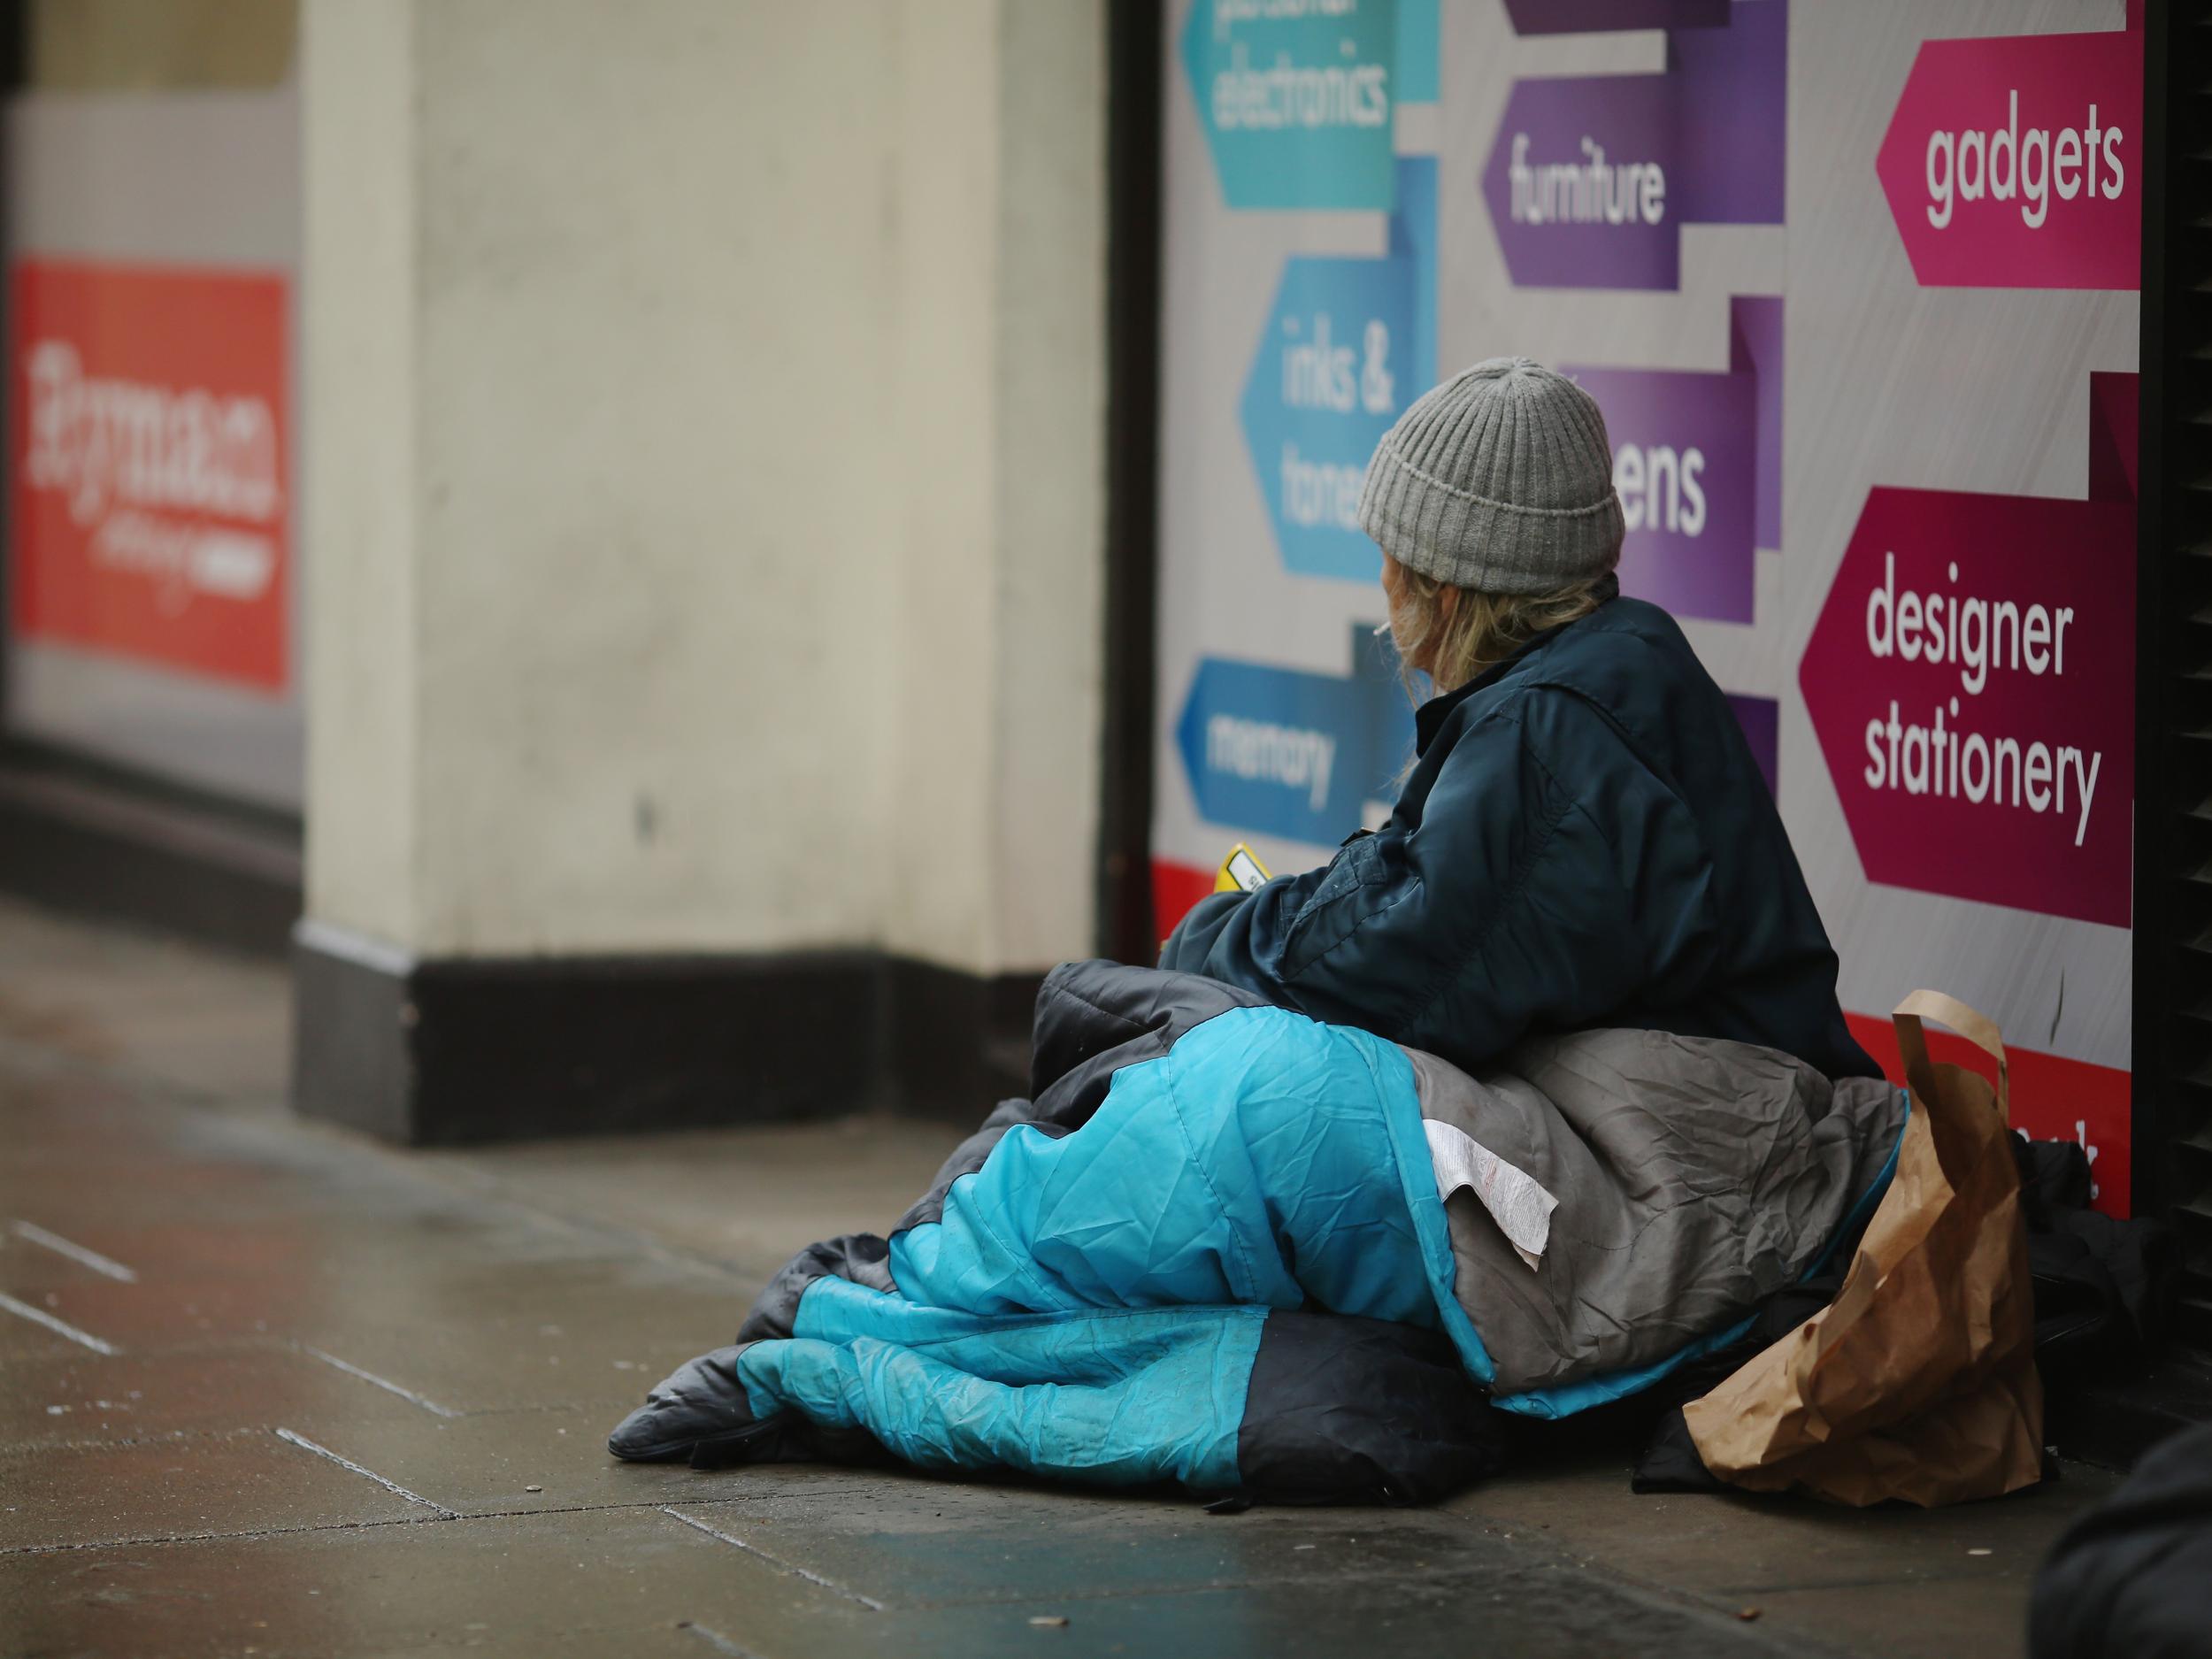 Rough sleepers have already been asked to leave a number of hotels in London, prompting fears that hundreds will be forced back onto the streets